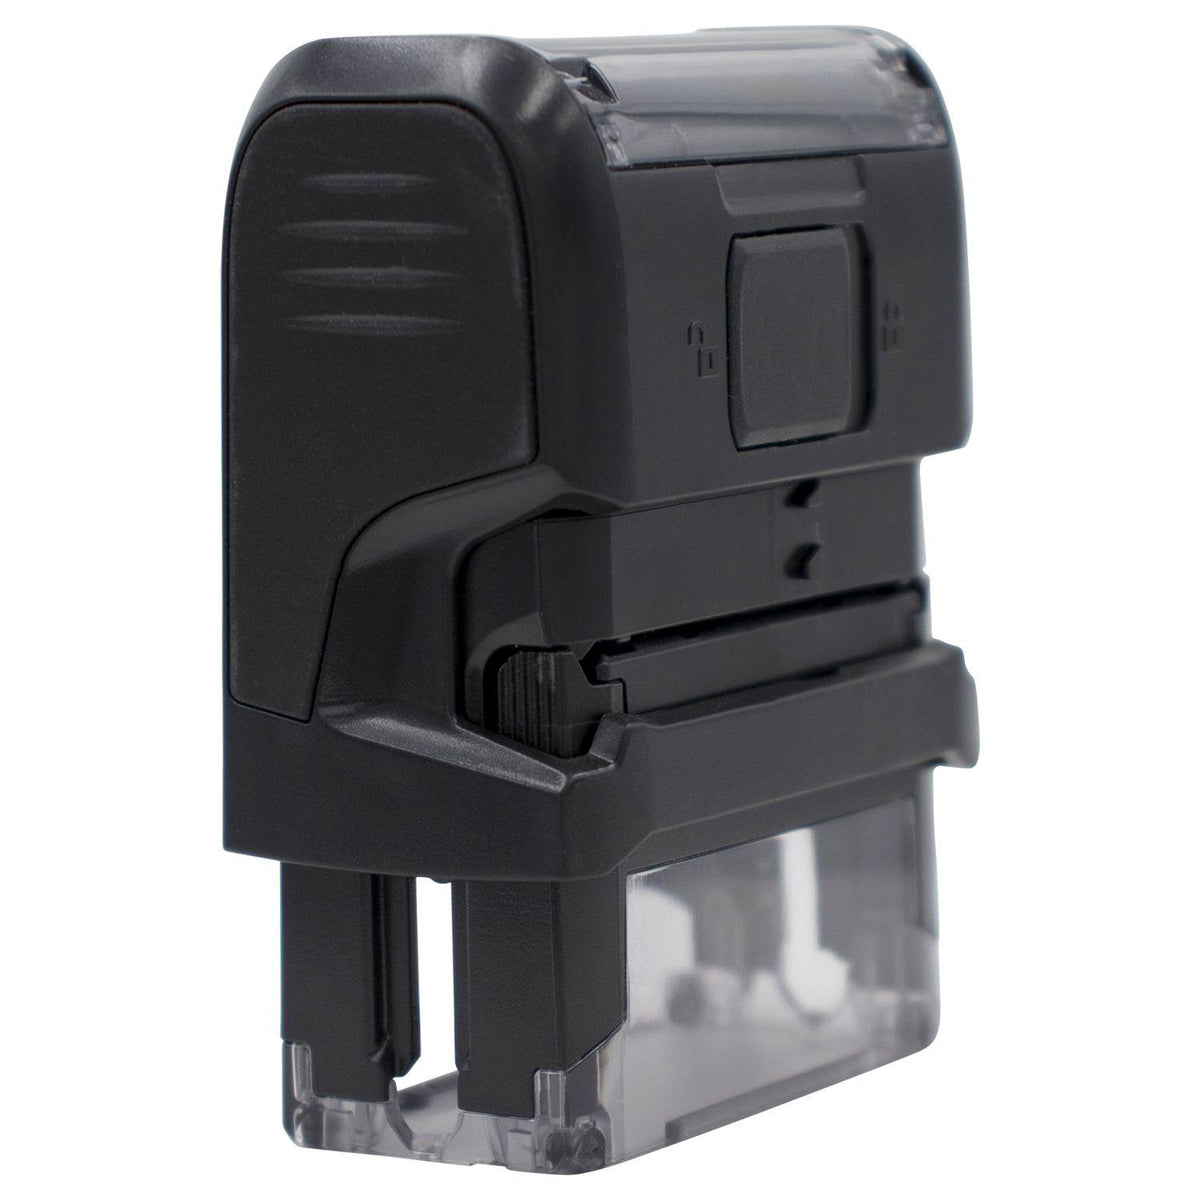 Large Self Inking Fragile Stamp - Engineer Seal Stamps - Brand_Trodat, Impression Size_Large, Stamp Type_Self-Inking Stamp, Type of Use_Postal &amp; Mailing, Type of Use_Shipping &amp; Receiving